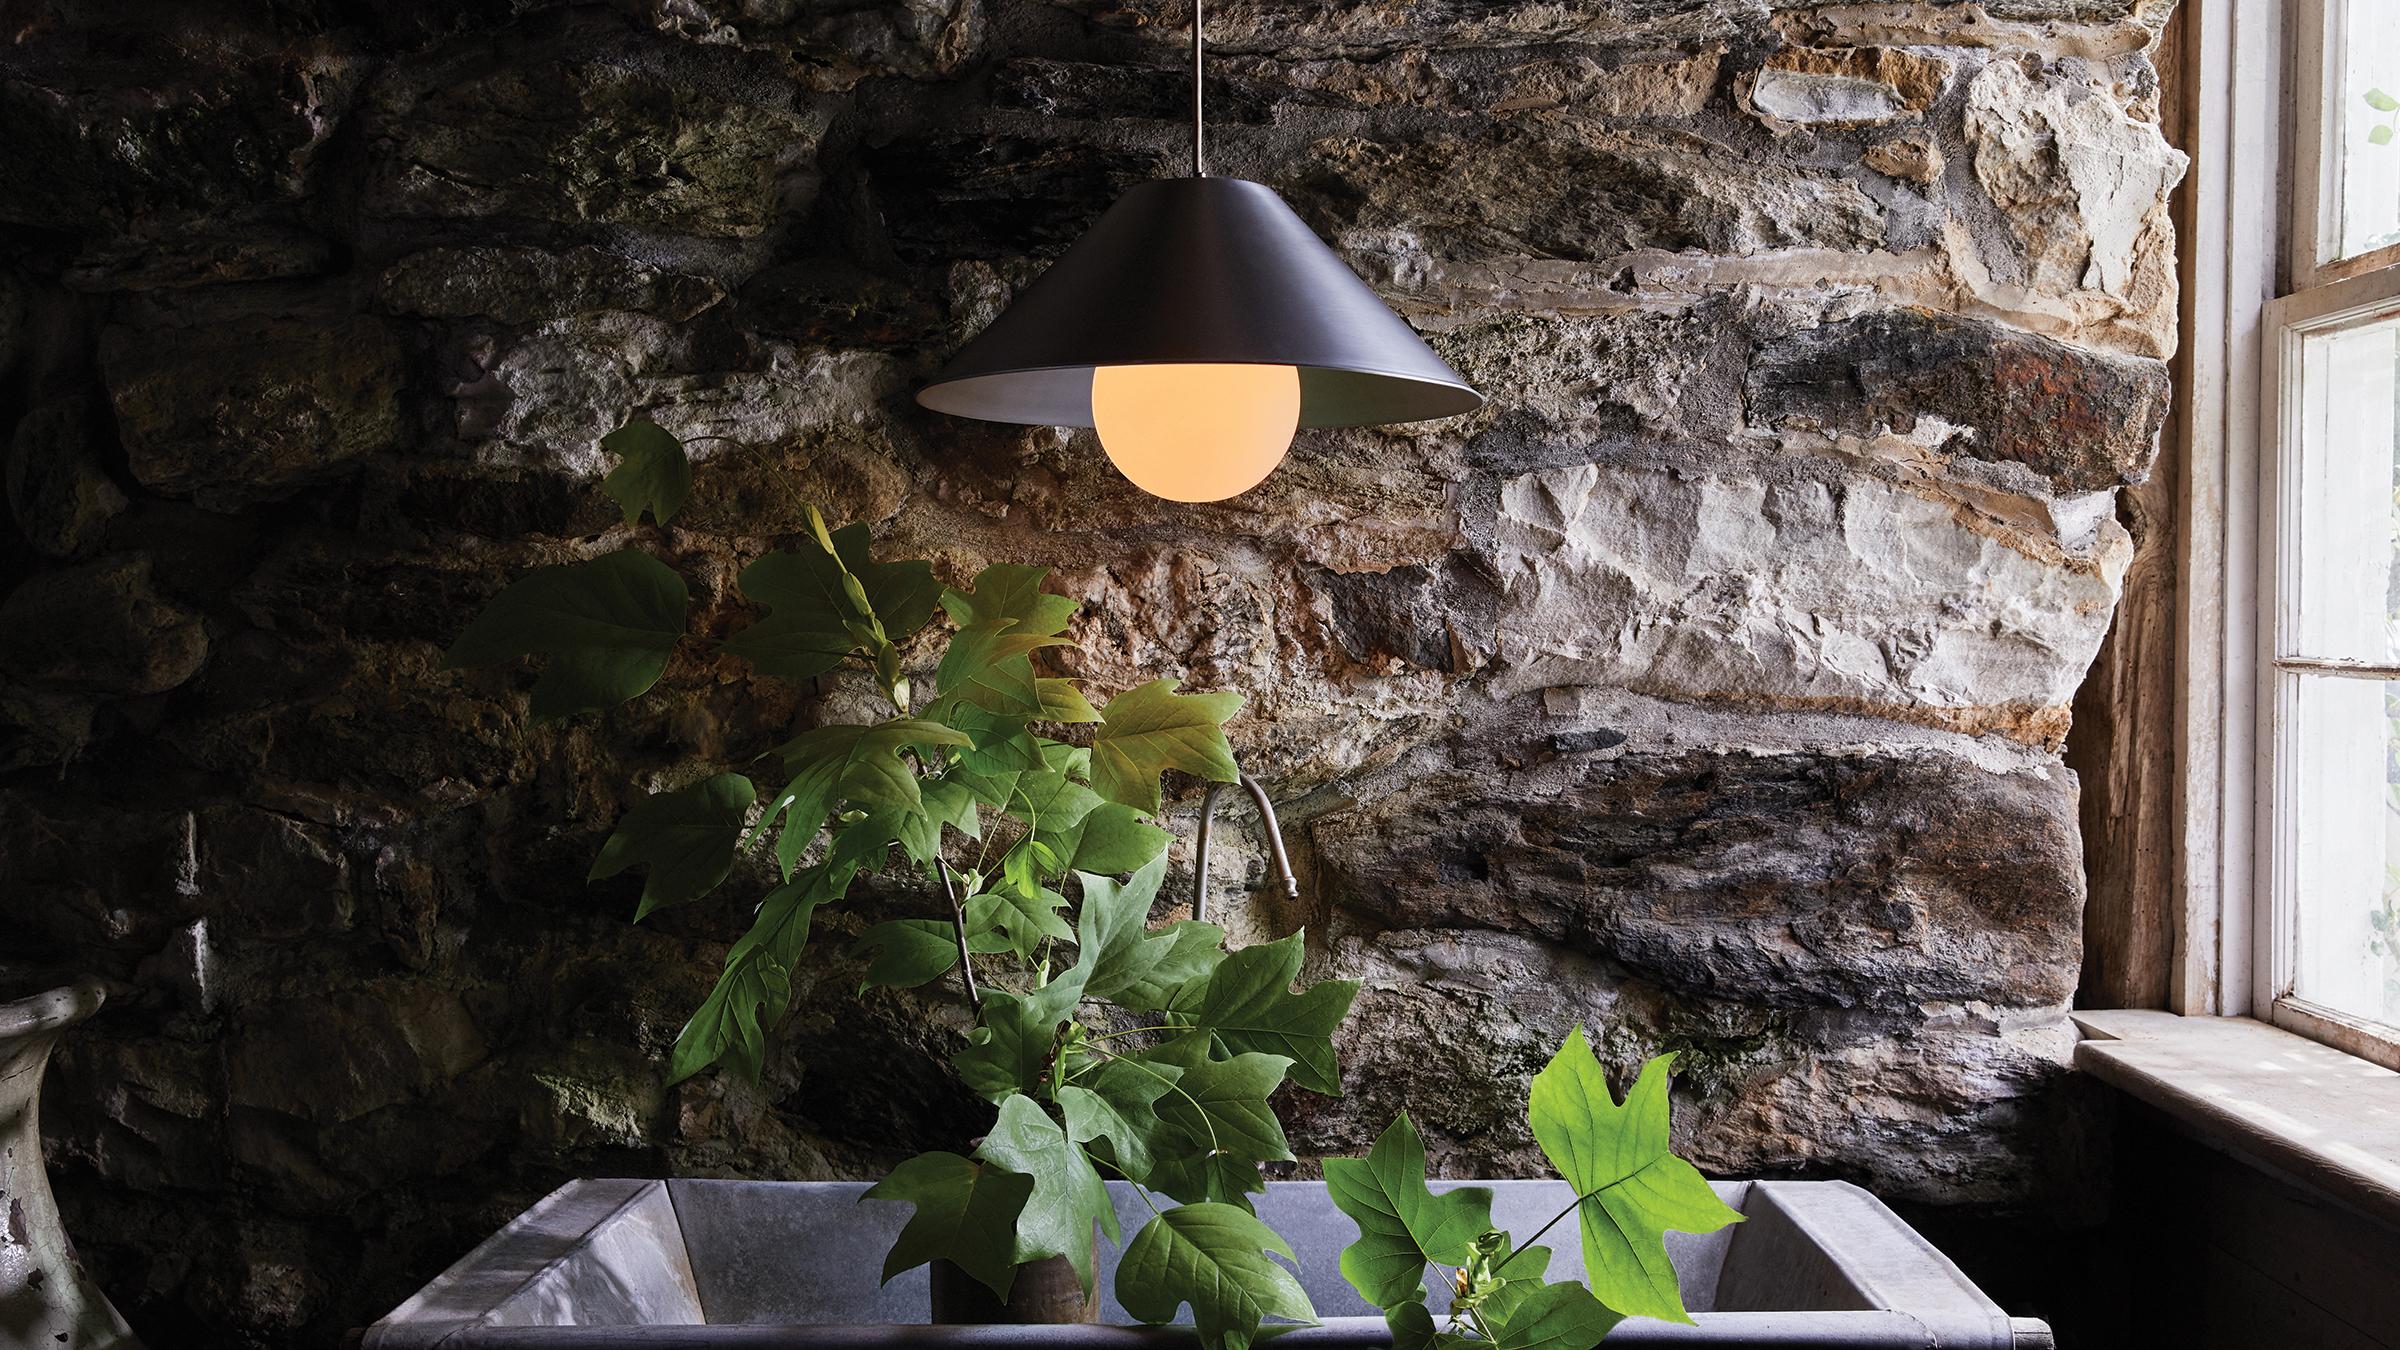 Monumental pendant small presents cool and softly reflective waxed aluminum at an intimate scale. When illuminated this elemental form transforms into a world of warm contours and optical topographies. Suspended by a delicate cloth cord this fixture